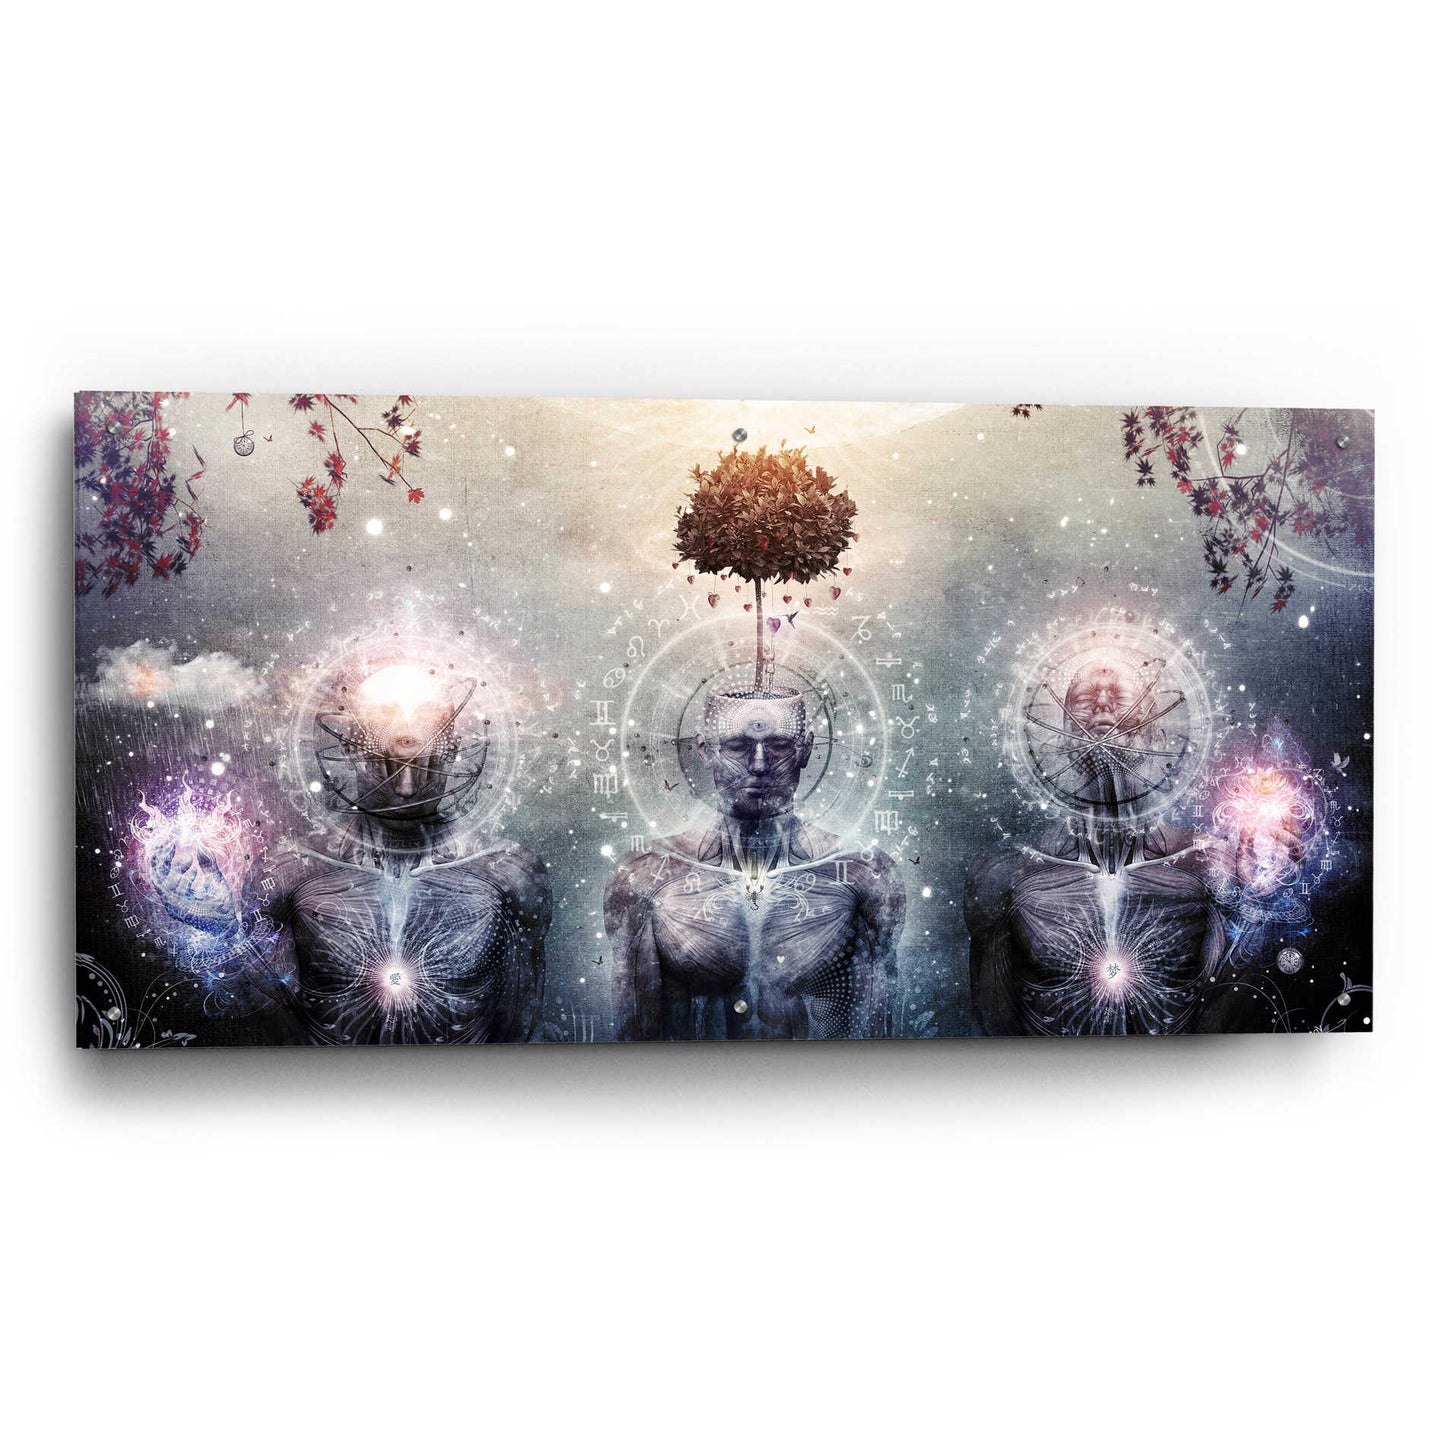 Epic Art 'Hope For The Sound Awakening' by Cameron Gray, Acrylic Glass Wall Art,48x24